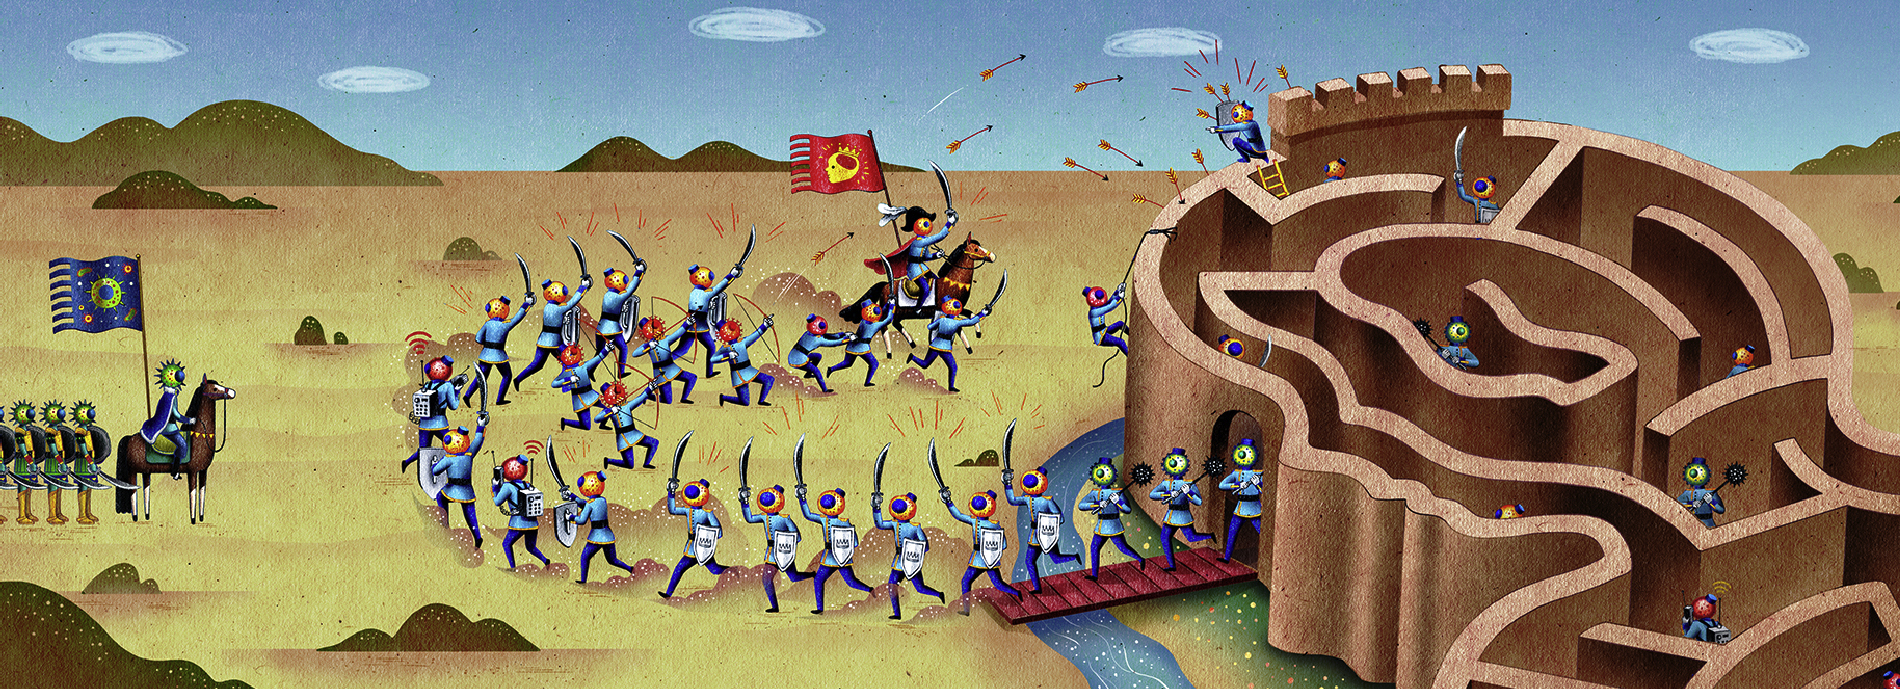 Immune system cells, portrayed as soldiers, leave a fortress only to circle back and attack the very fort from which they came: this image evokes the idea of an auto-immune disorder.